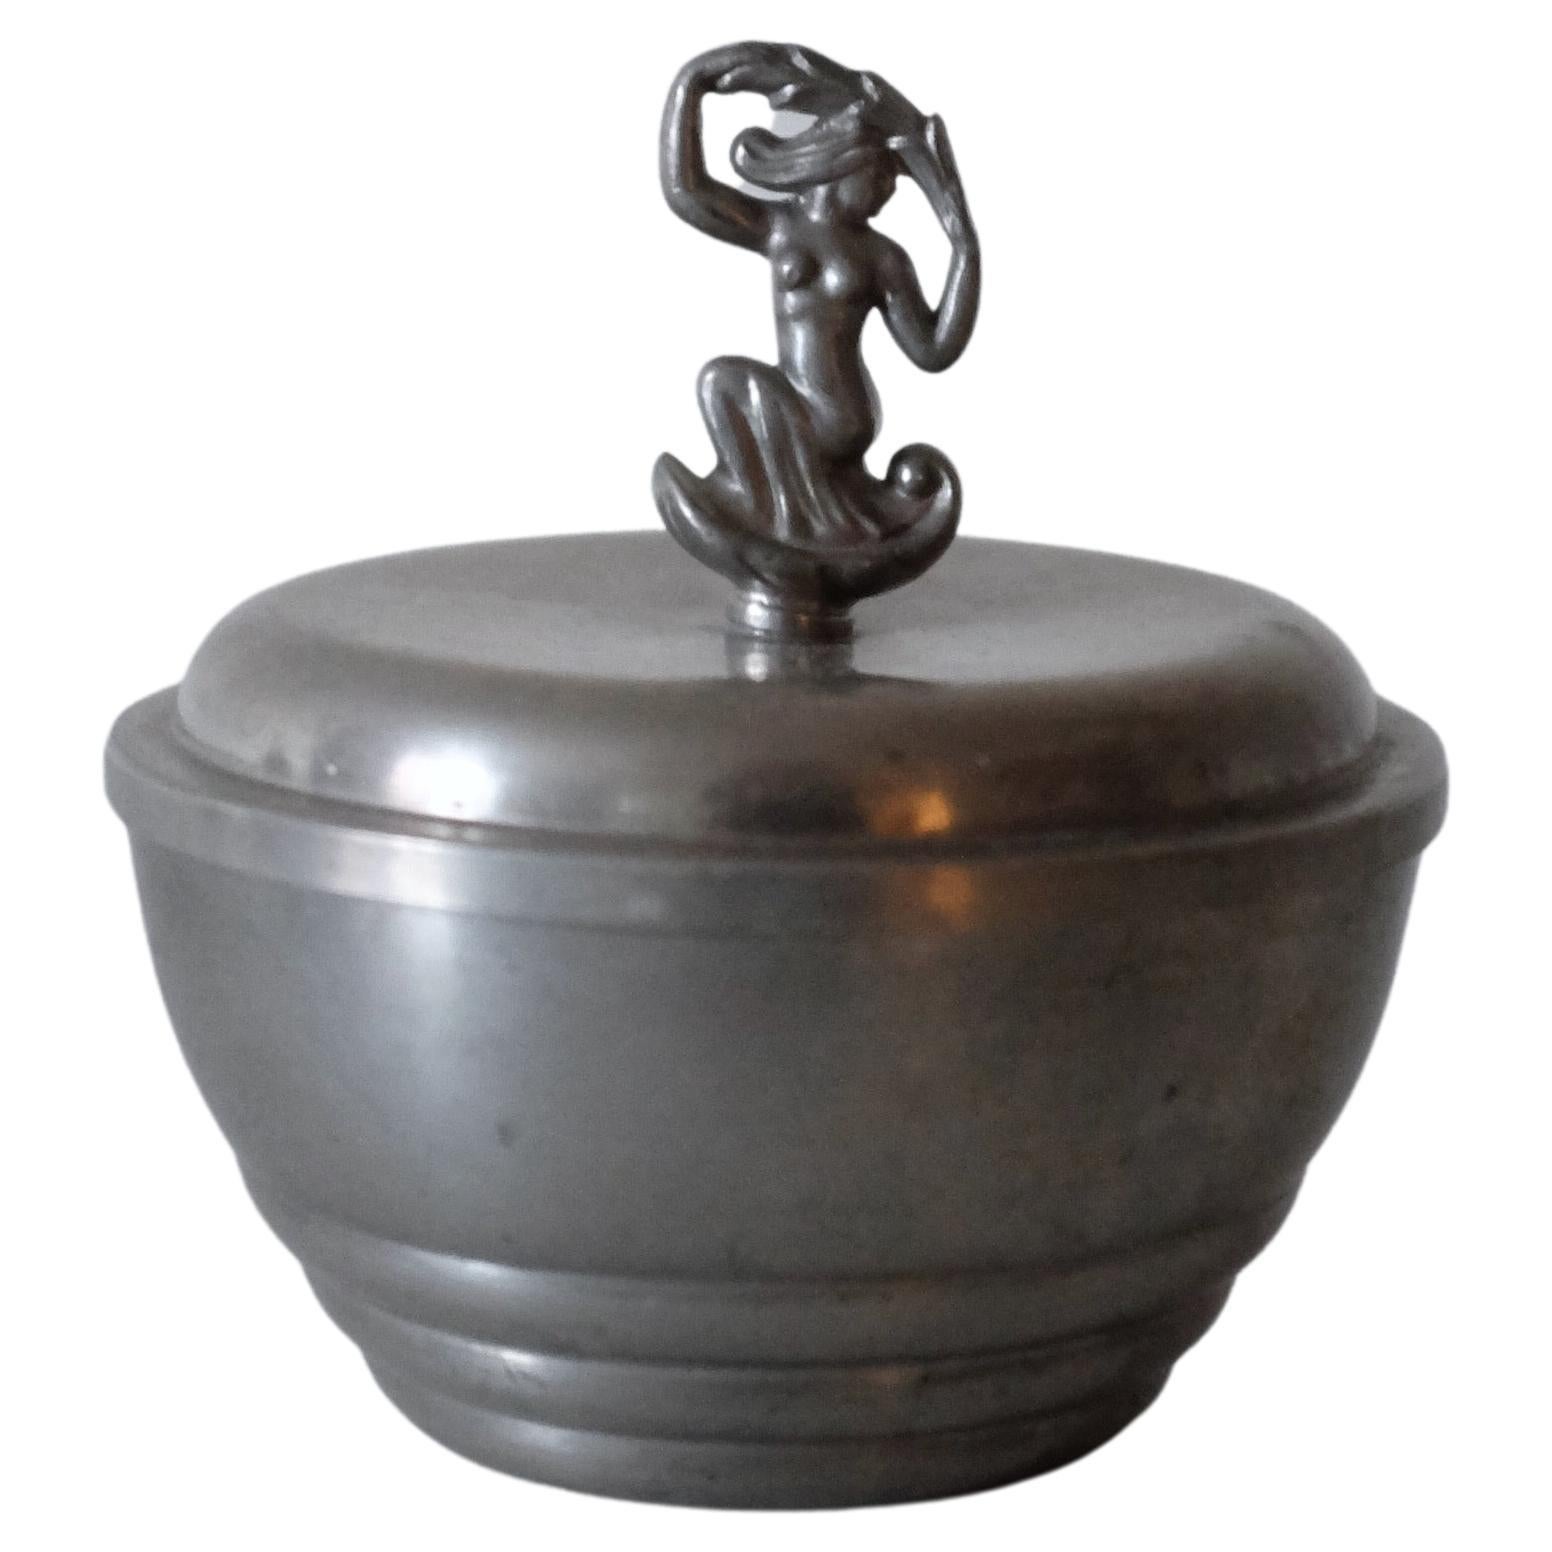 1932 Pewter Jar from C.G. Hallberg For Sale